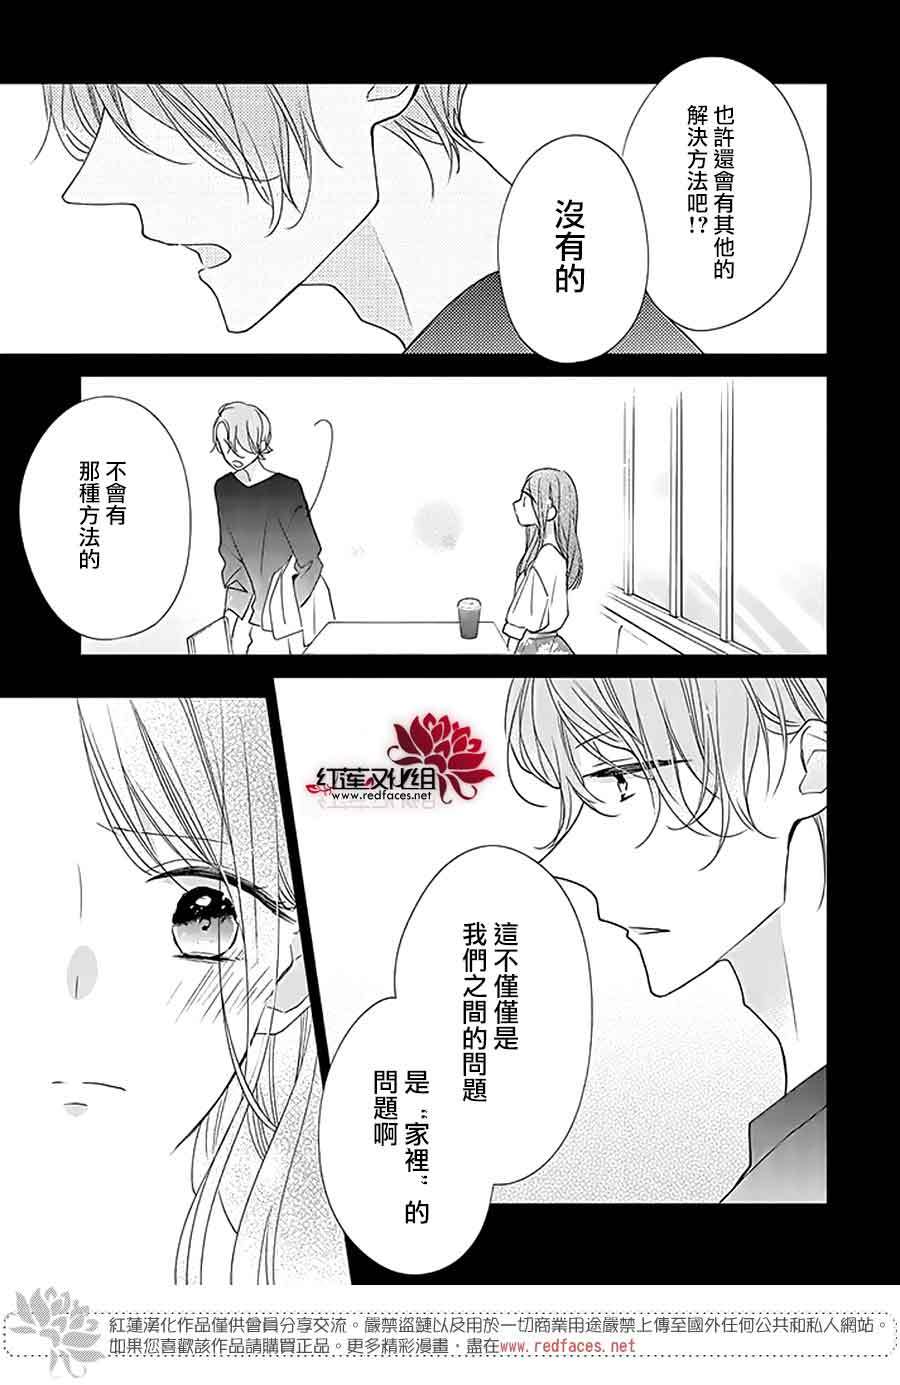 If given a second chance - 26话 - 5